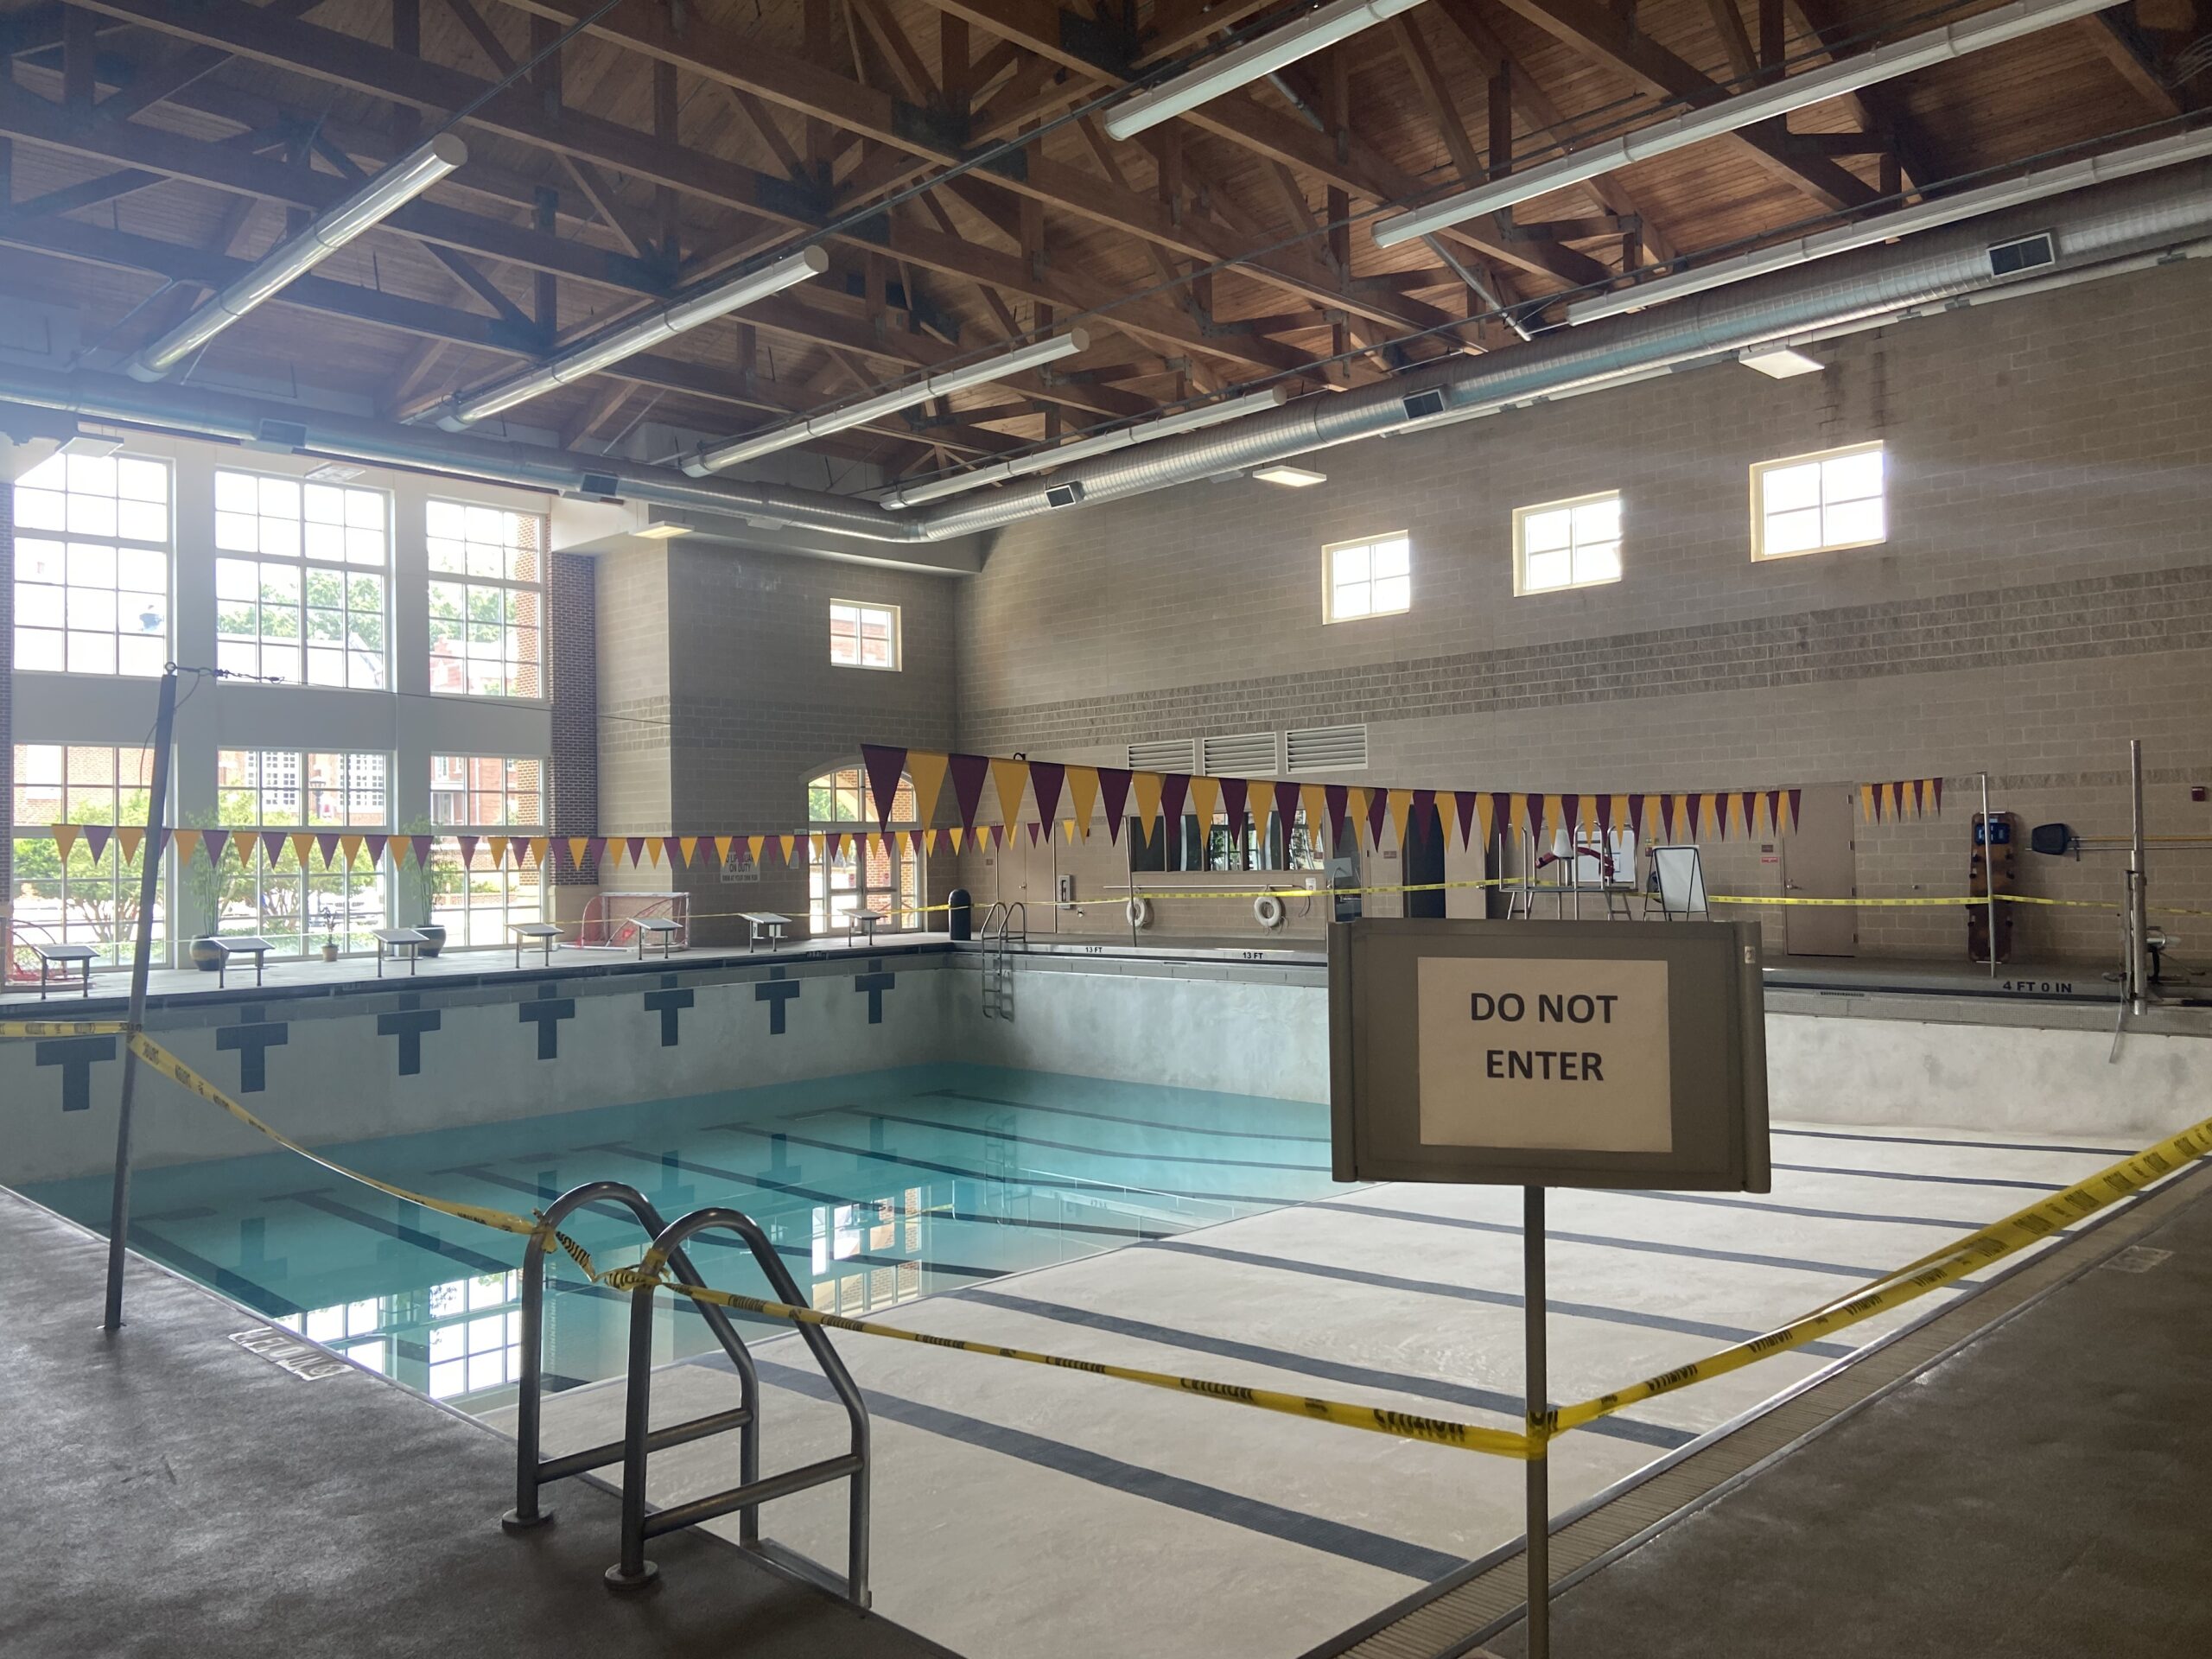 West Center pool remains closed for maintenance